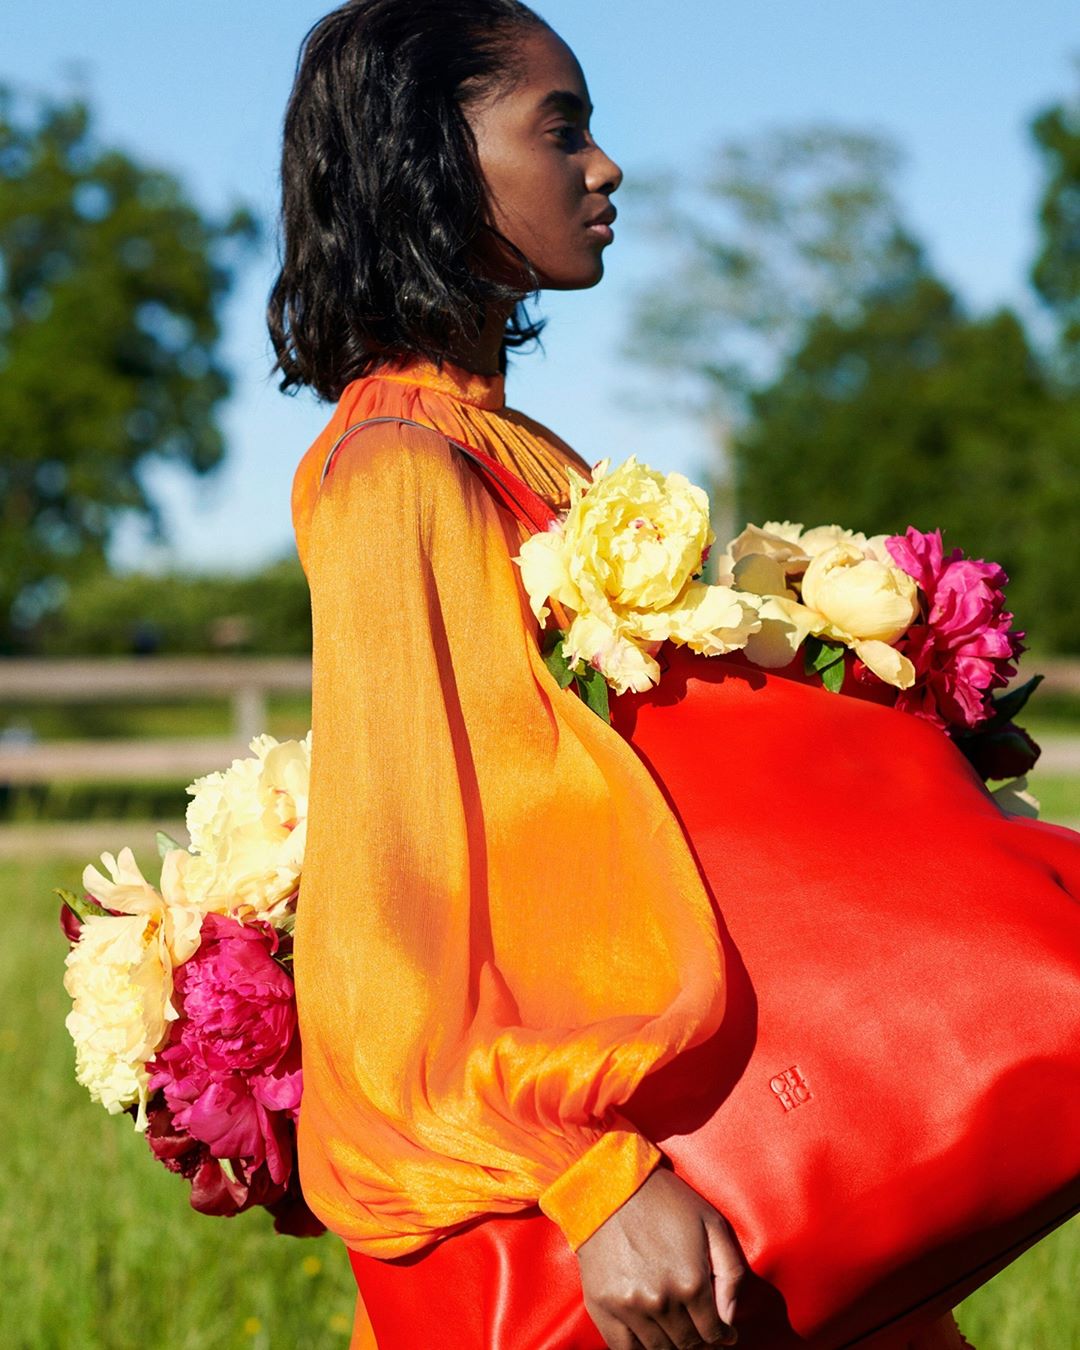 CAROLINA HERRERA - Blooming beautiful! The clementine orange cape mini dress from our Fall 2020 collection styled with the #CHMatryoshkaBag in red. Shot by @paul_maffi at @wesgordon’s farm in Connecti...